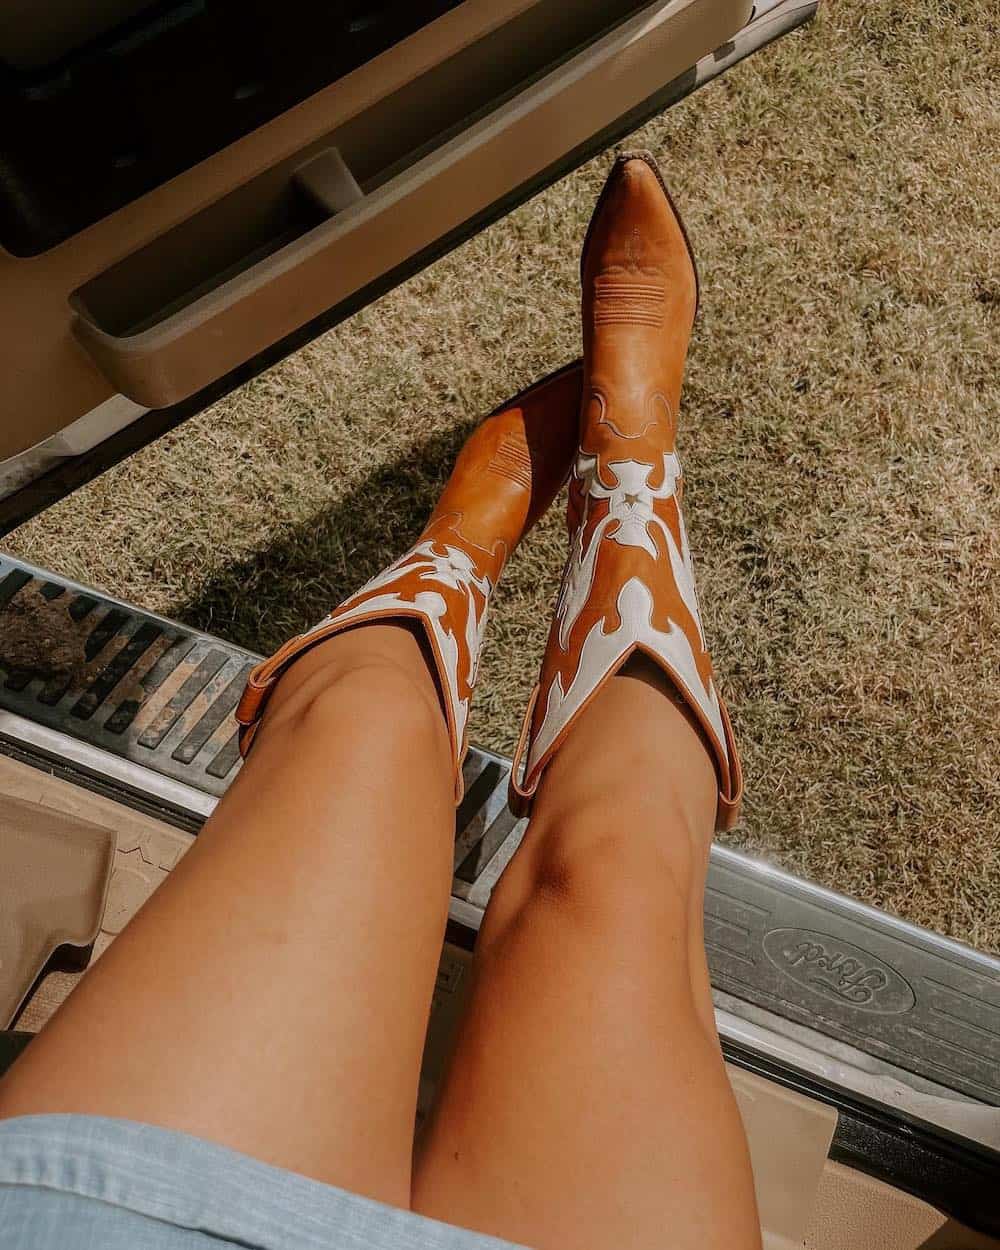 image of a woman's legs wearing brown and white cowboy boots for the rodeo